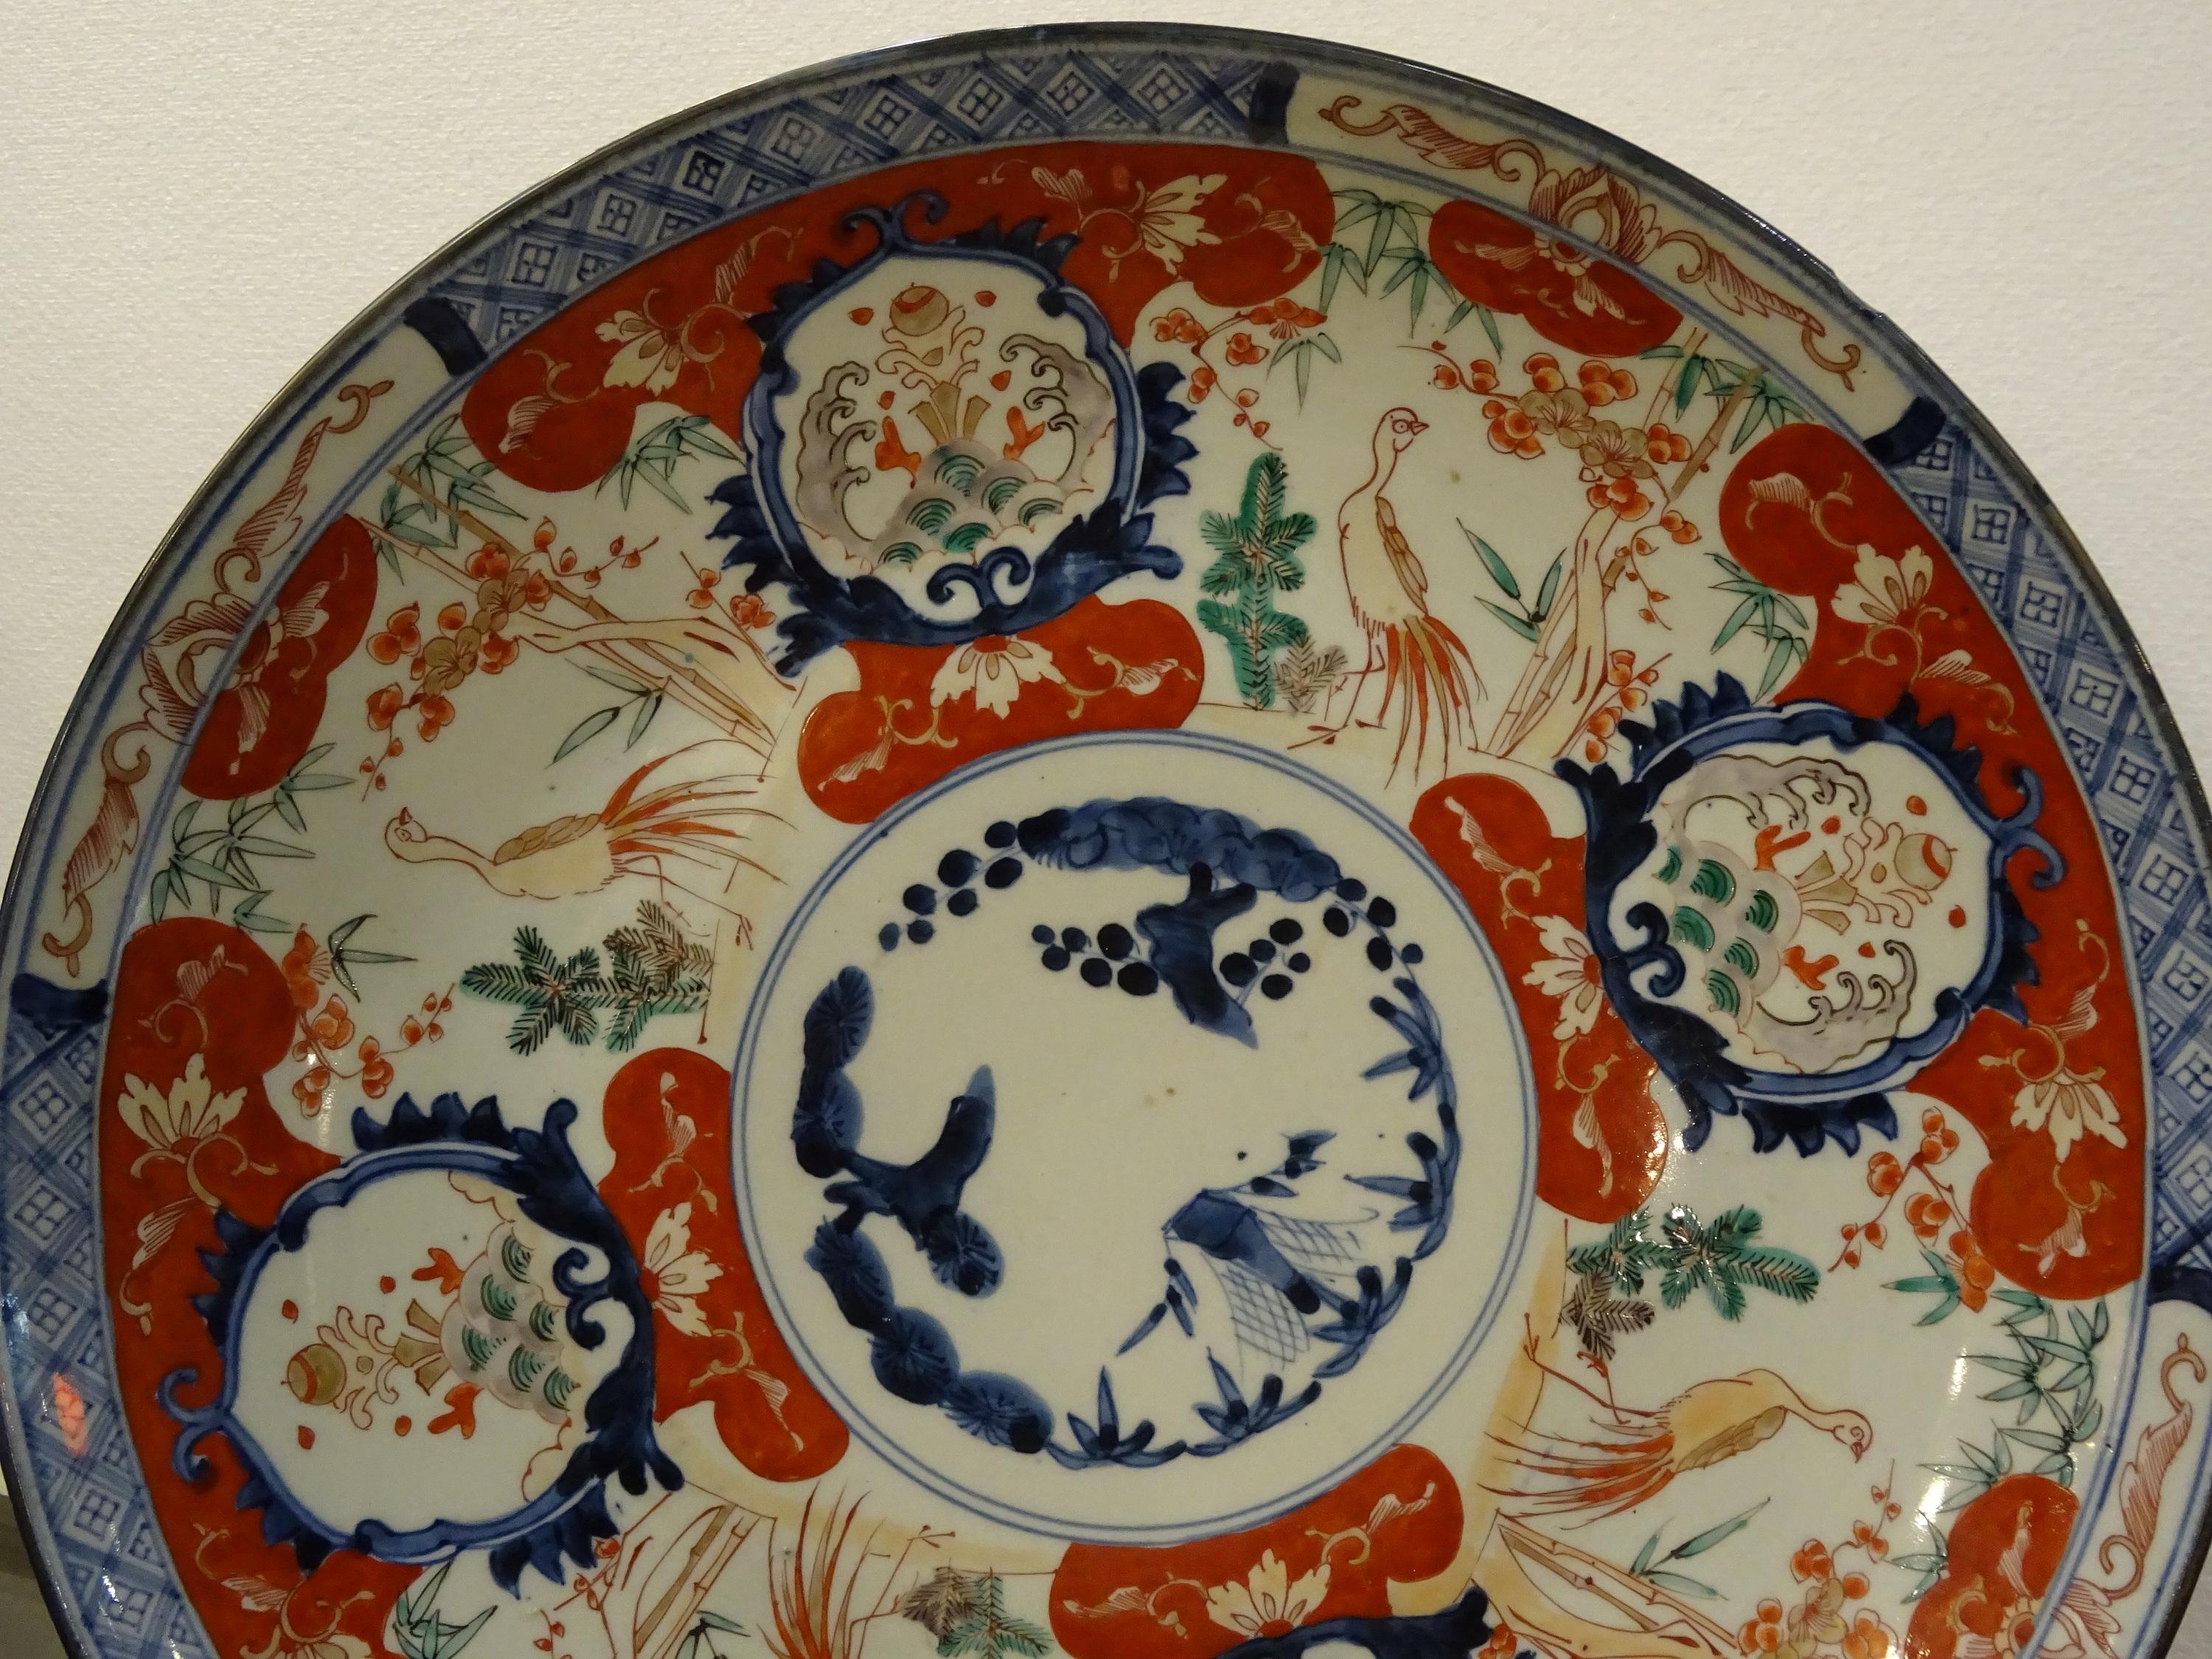 One of a kind large red, blue and white Imari hand painted Japan porcelain plate.
It has the Kakiemon design with flowers in red, blue and green colors and peacocks.
The Imari porcelain was very important in the Edo period, until 1868, influencing